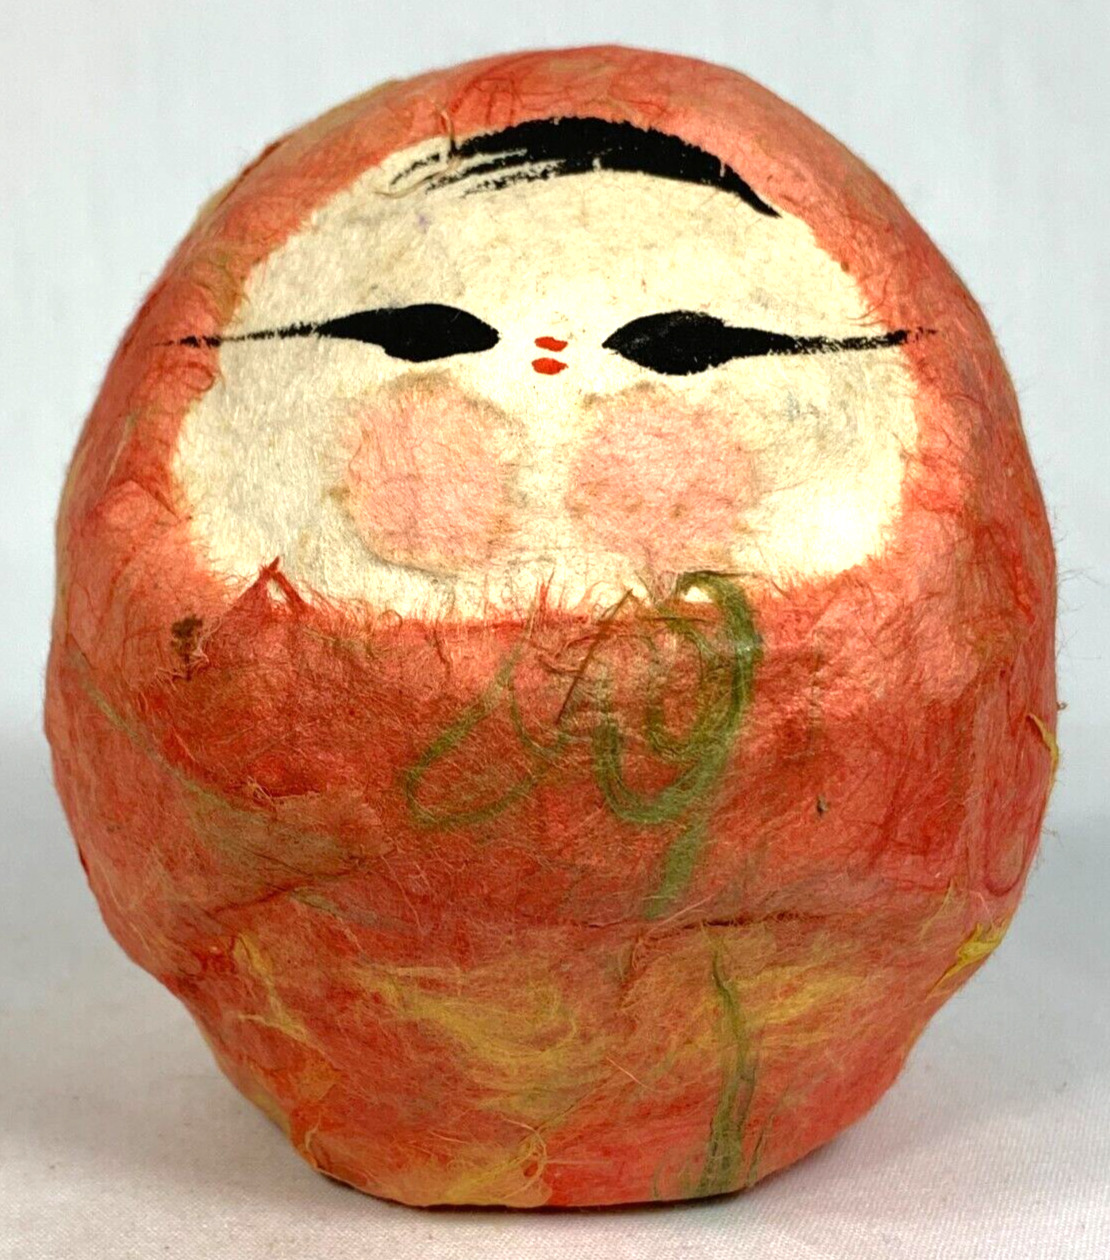 Hime Daruma Doll Vintage Japanese Washi Paper Mache Upright Weighted Hand Made